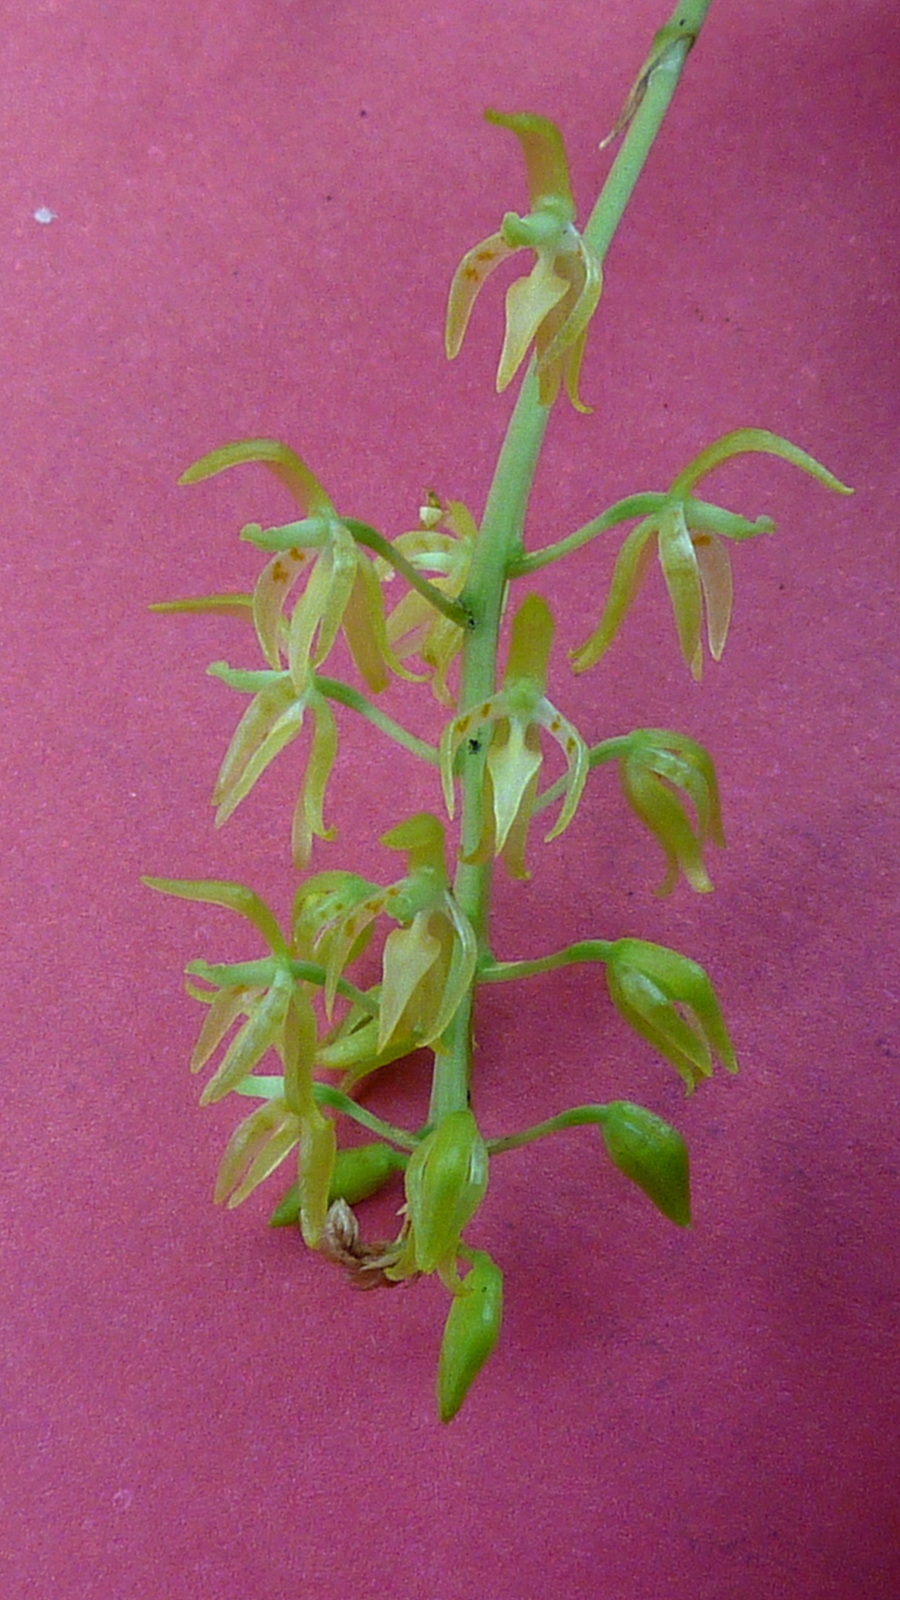 a single stem of the plant, with tiny buds on each end